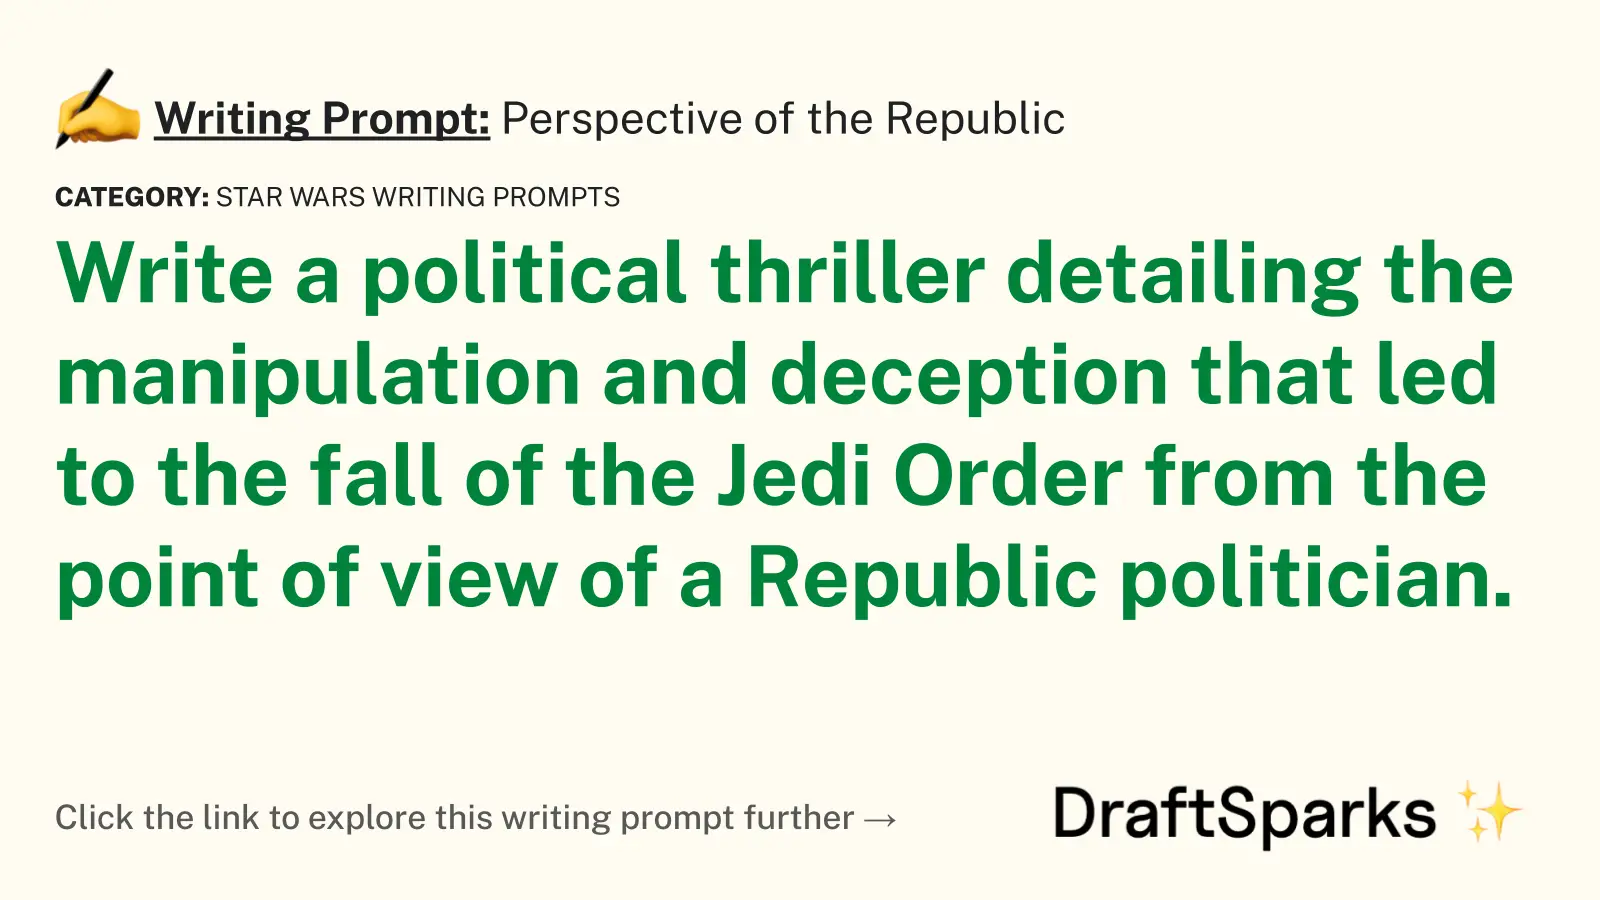 Perspective of the Republic